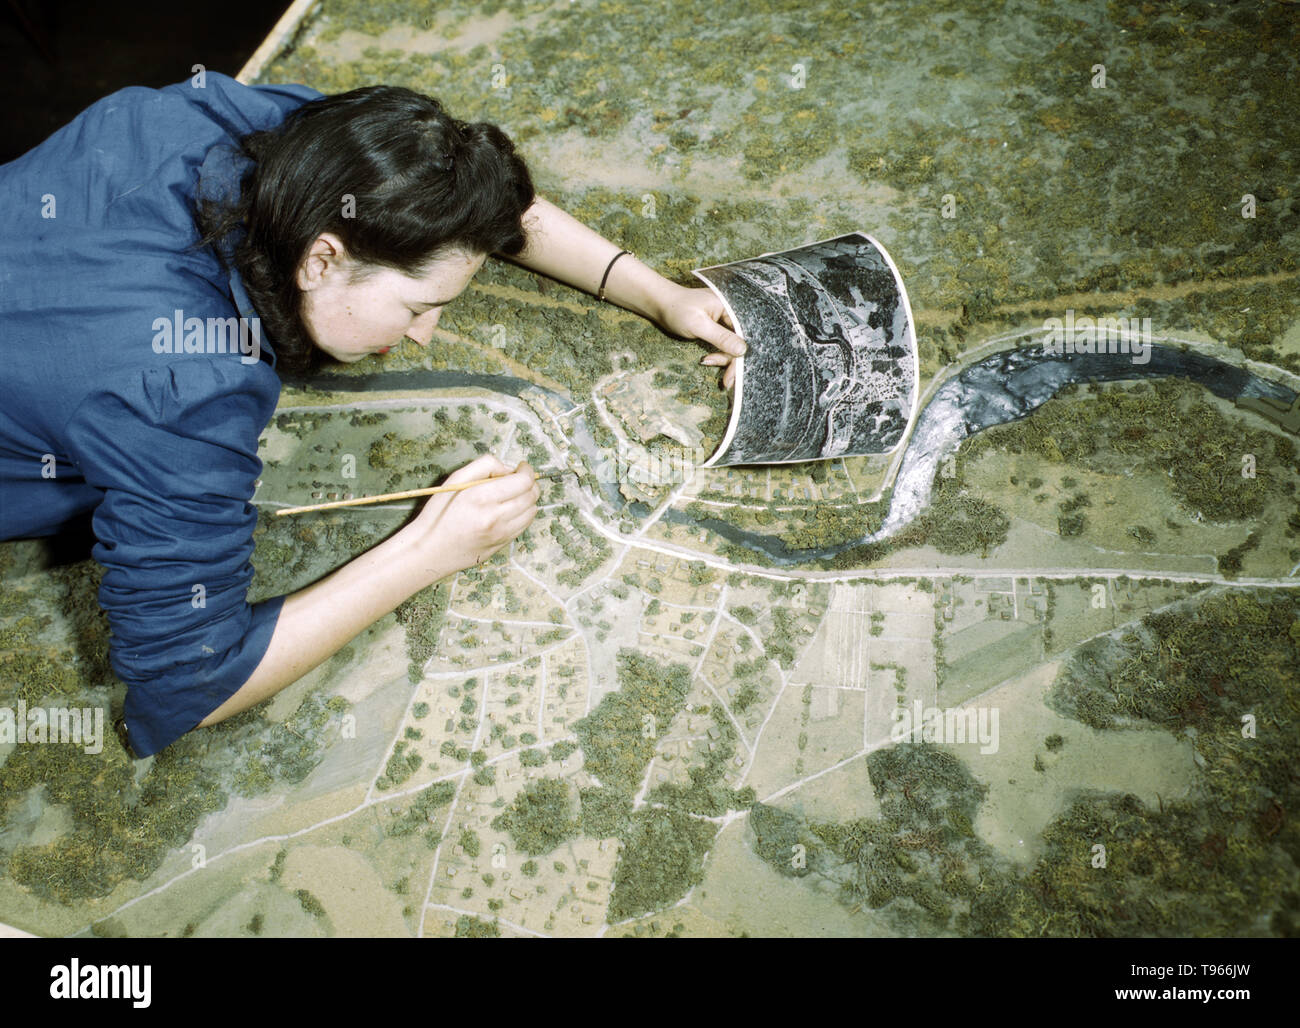 Camouflage class at New York University, where men and women are preparing for jobs in the Army or in industry, New York, N.Y. This model has been camouflaged and photographed. The girl is correcting oversights detected in the camouflaging of a model defense plant  Photographed by Marjory Collins, 1943. Stock Photo